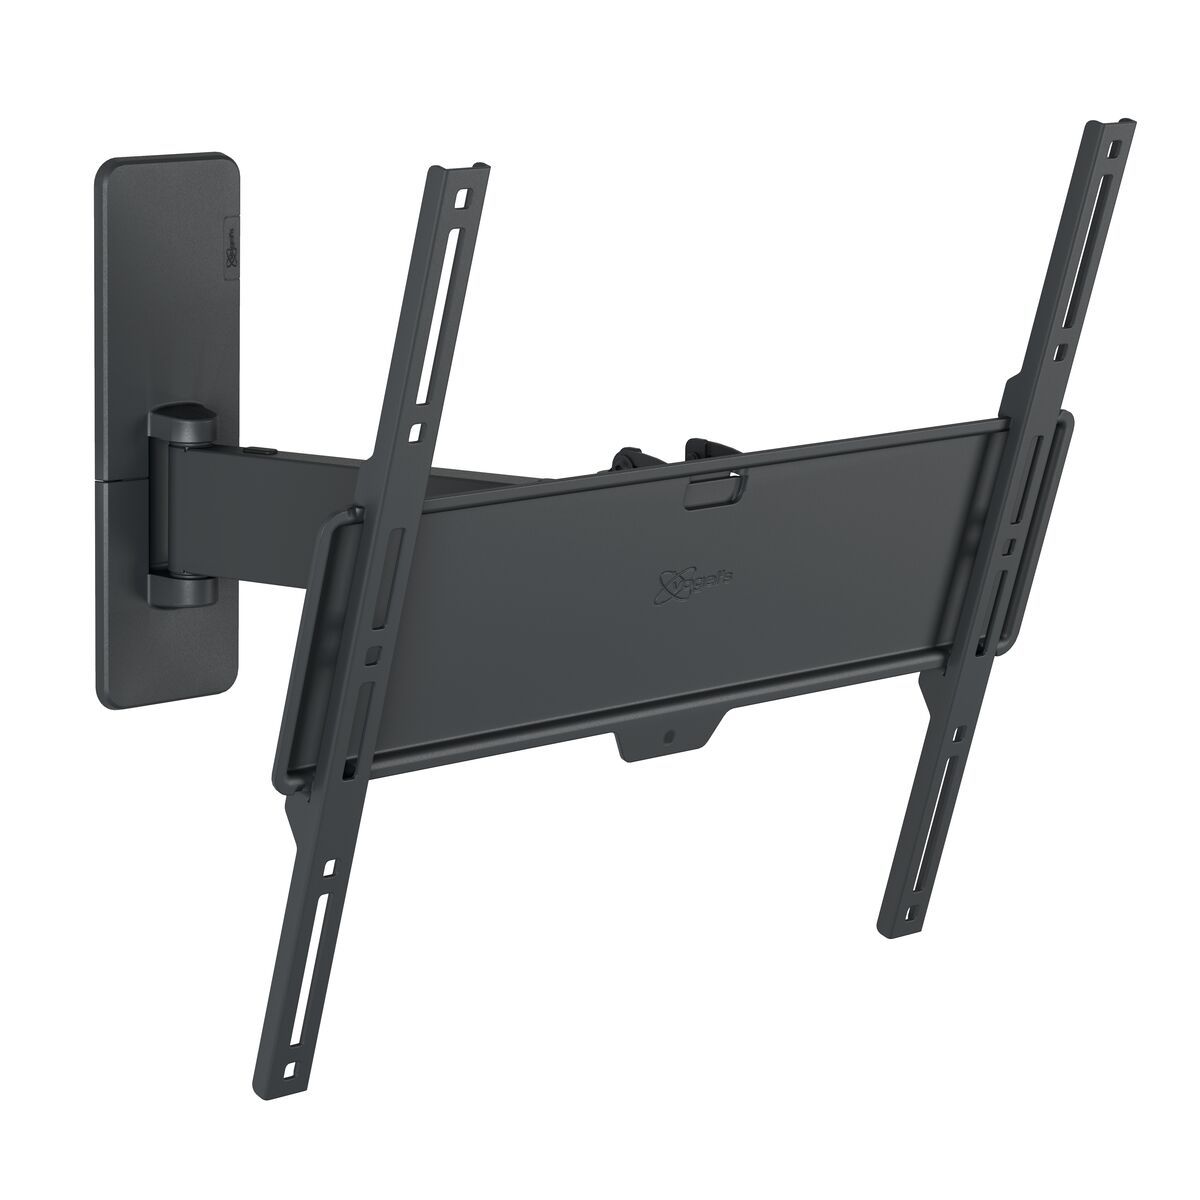 Vogel's TVM 1423 Full-Motion TV Wall Mount - Suitable for 32 up to 65 inch TVs - Motion (up to 120°) swivel - Tilt up to 15° - Product